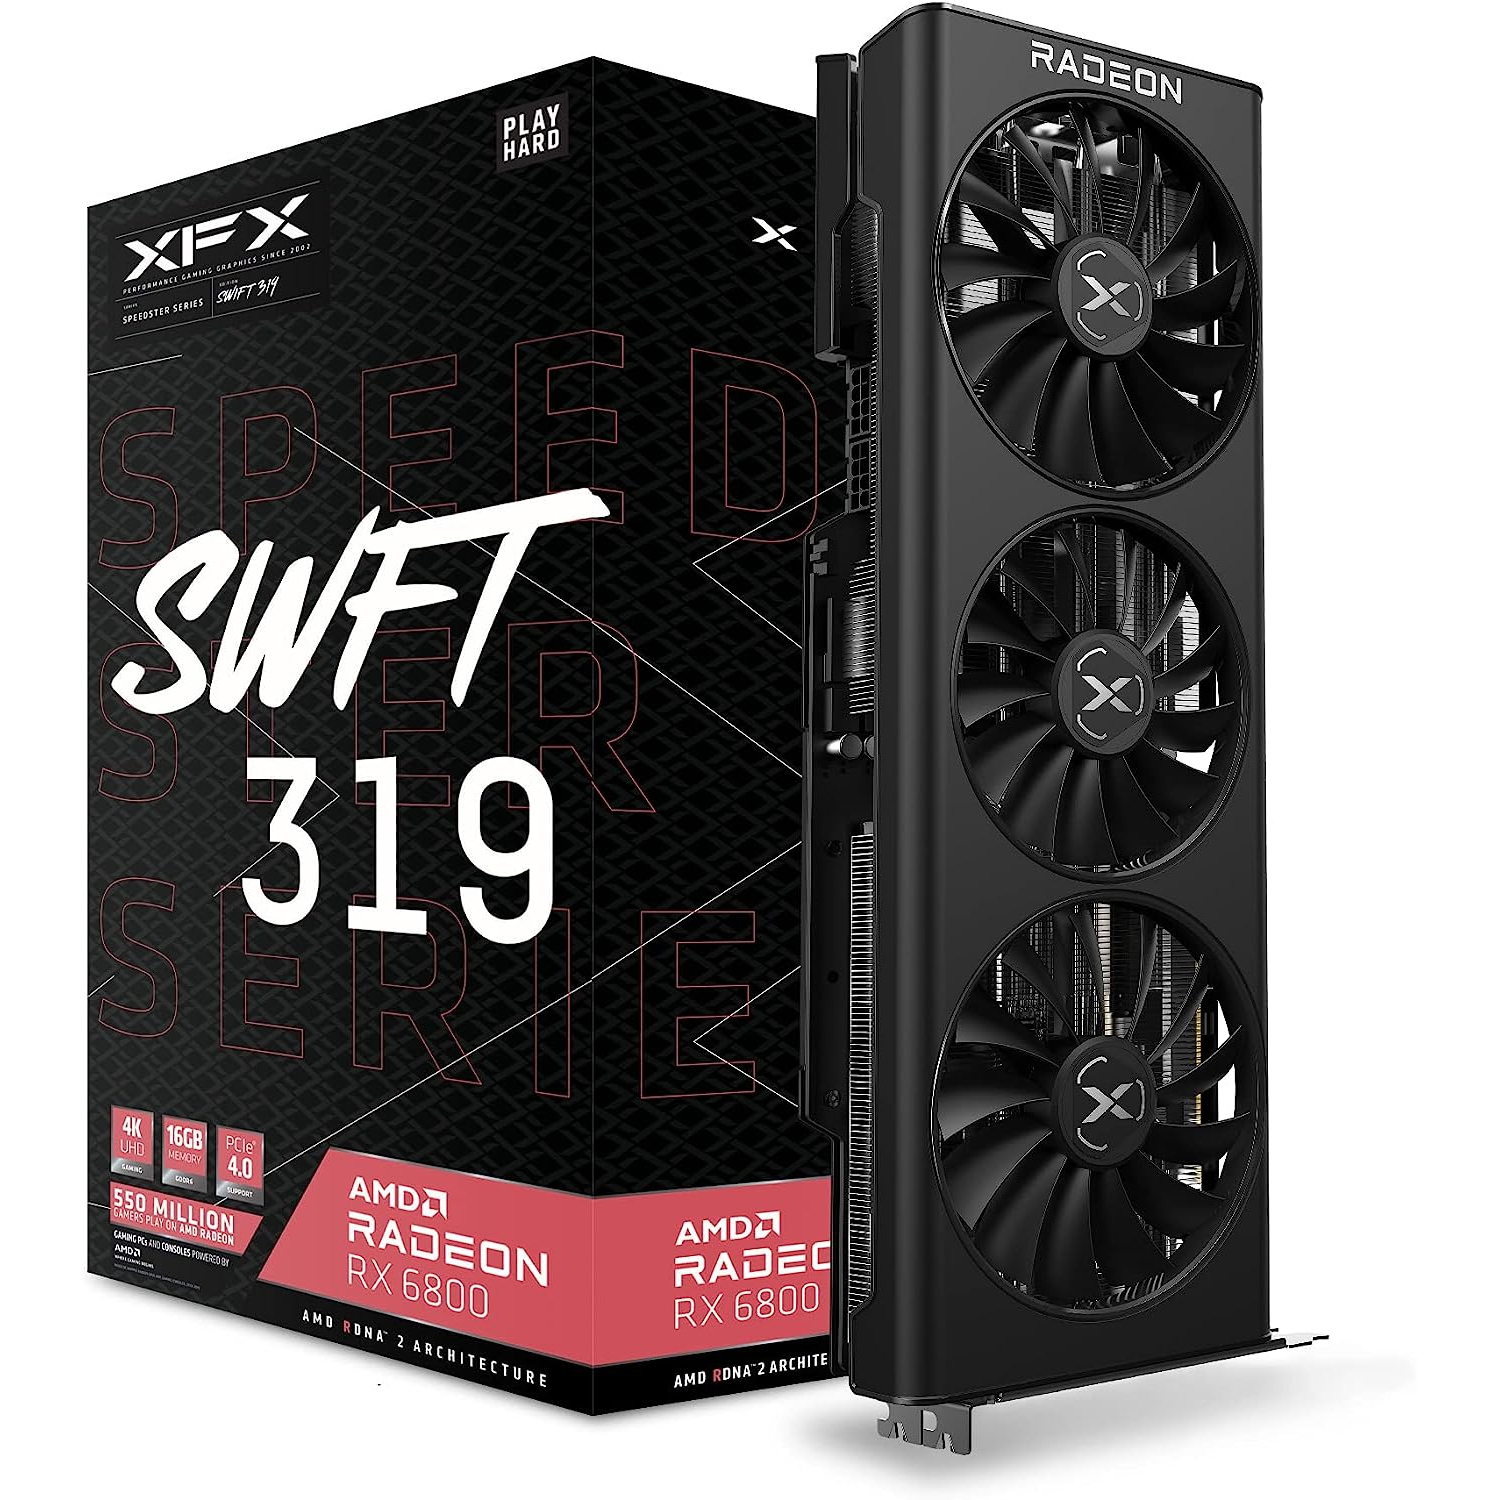 XFX Speedster SWFT319,Radeon™ RX 6800 Core Gaming Graphics Card with 16GB GDDR6, AMD RDNA 2